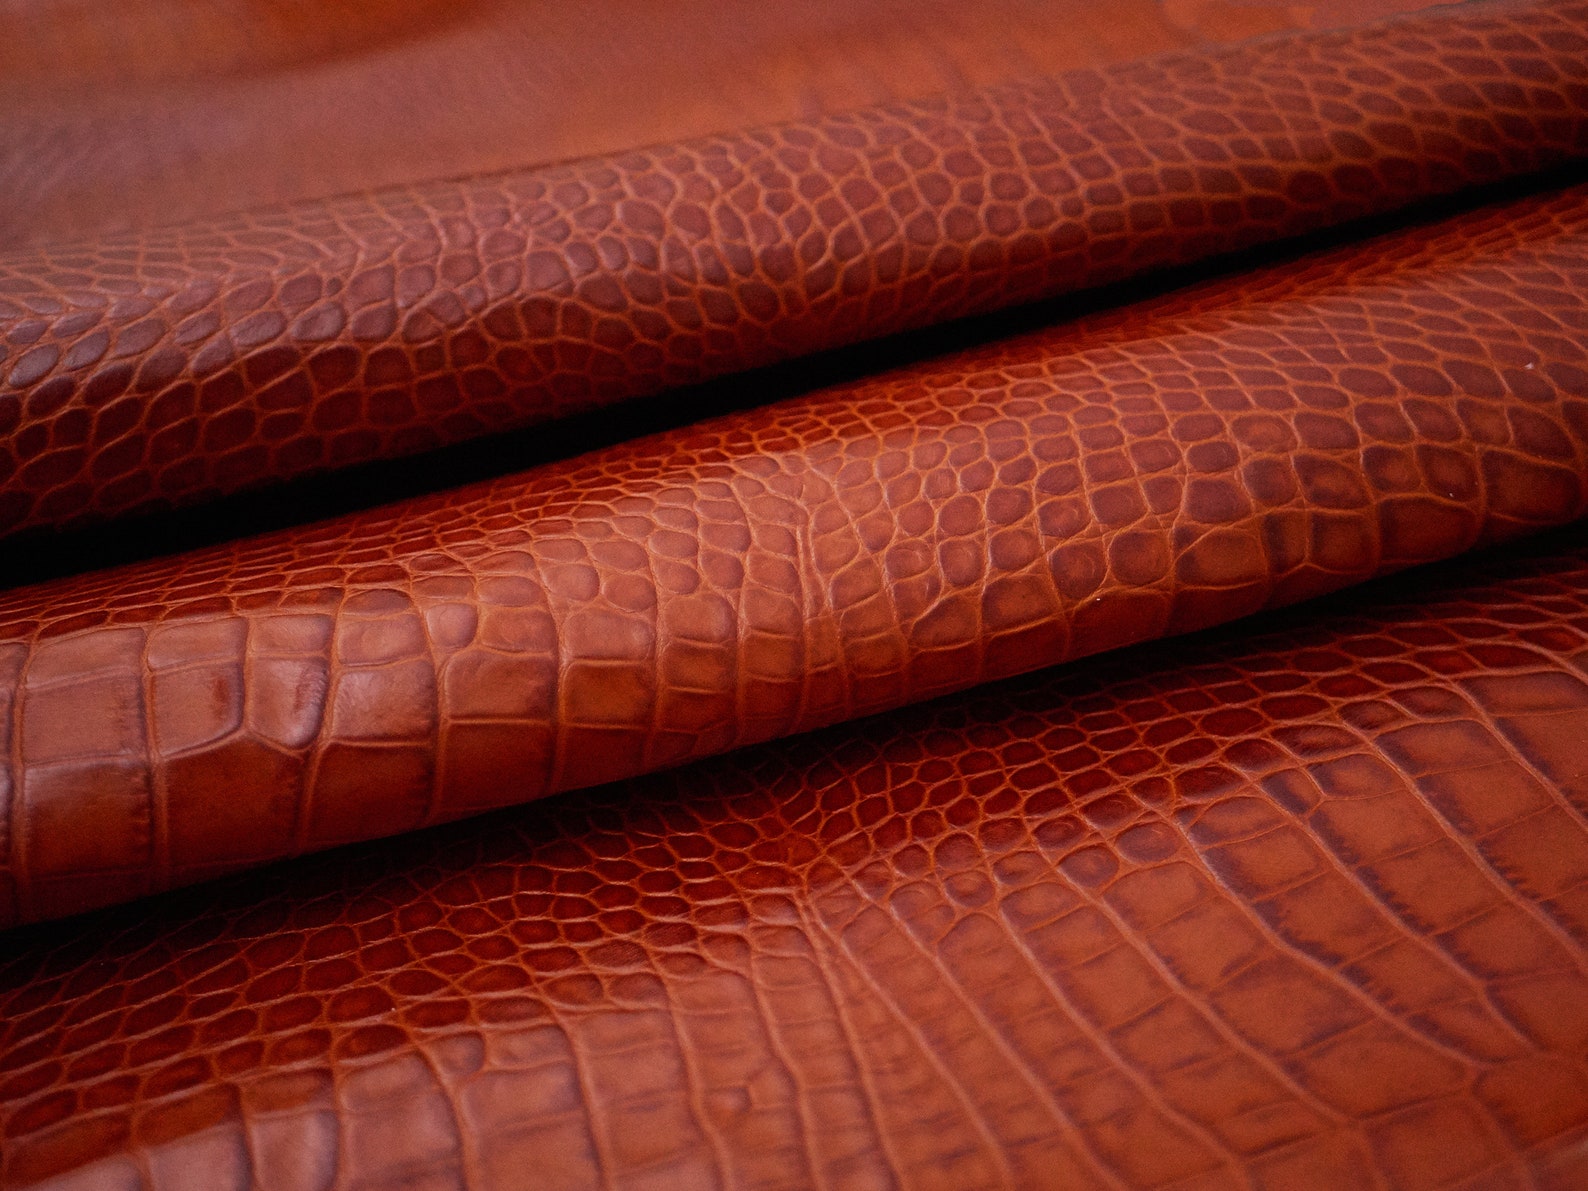 Embossed Crocodile Print on Cowhide Leather for Upholstery High Quality ...